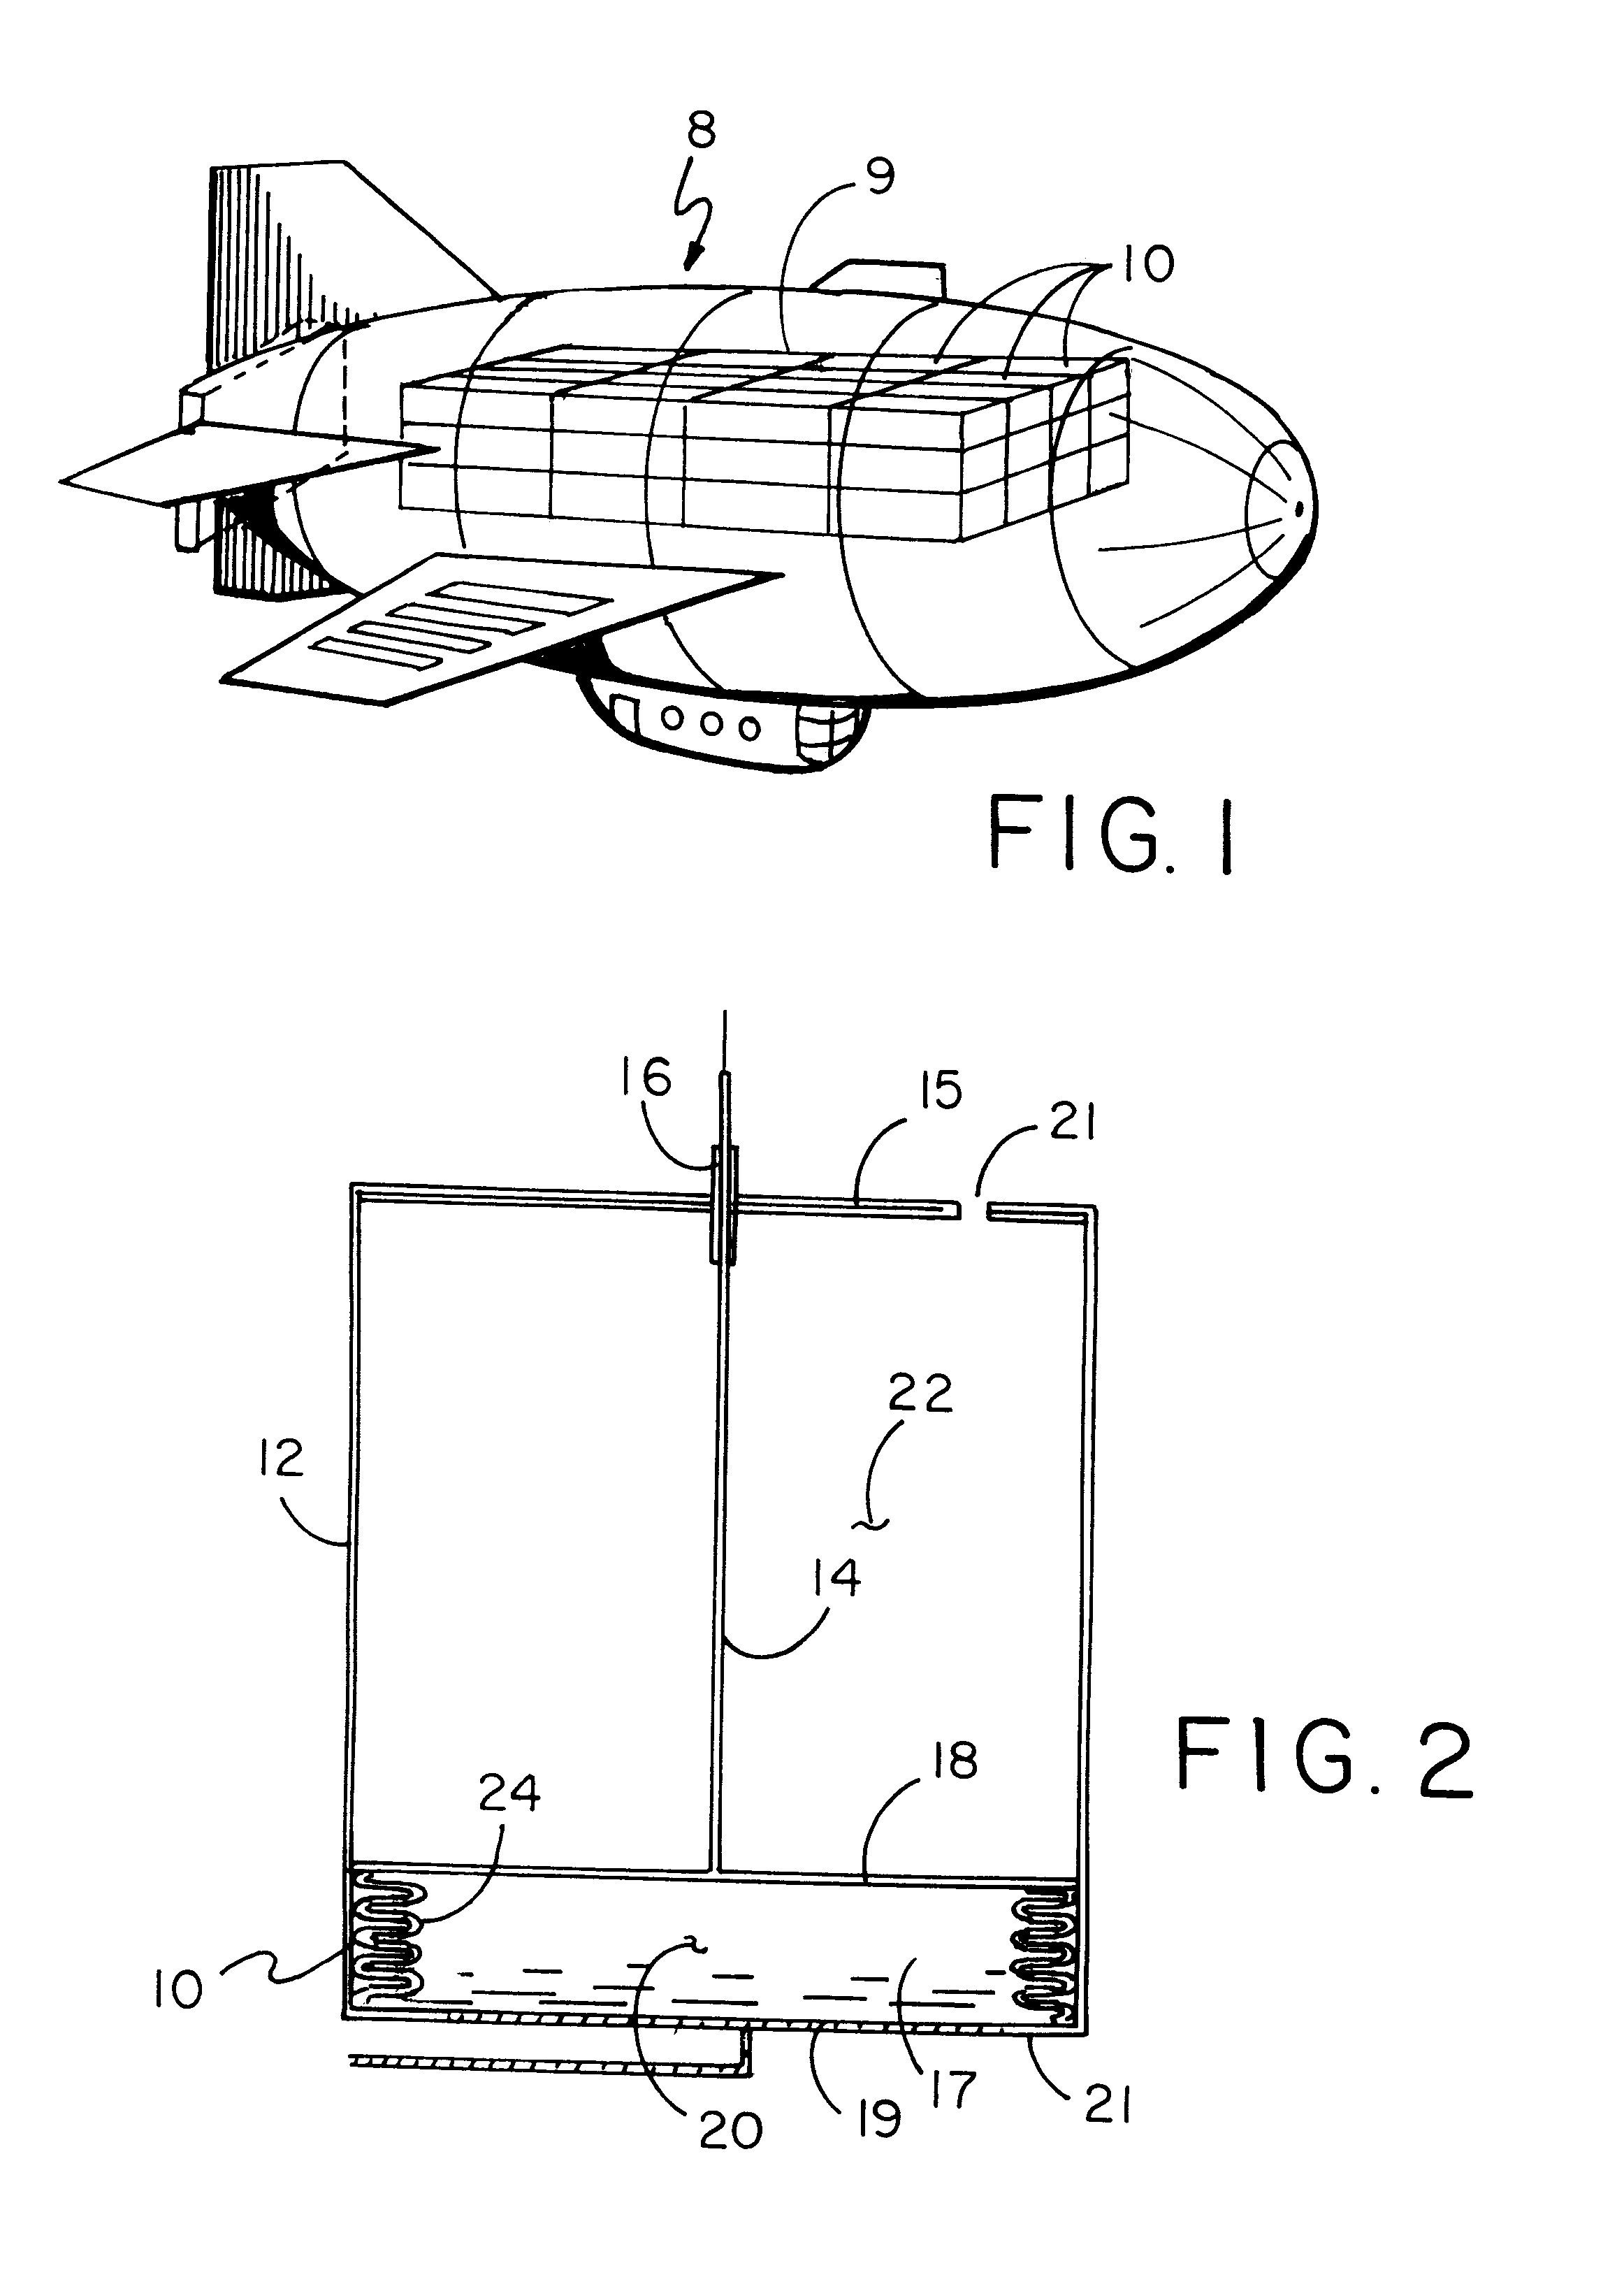 Apparatus and method utilizing cells to provide lift in lighter-than-air airships